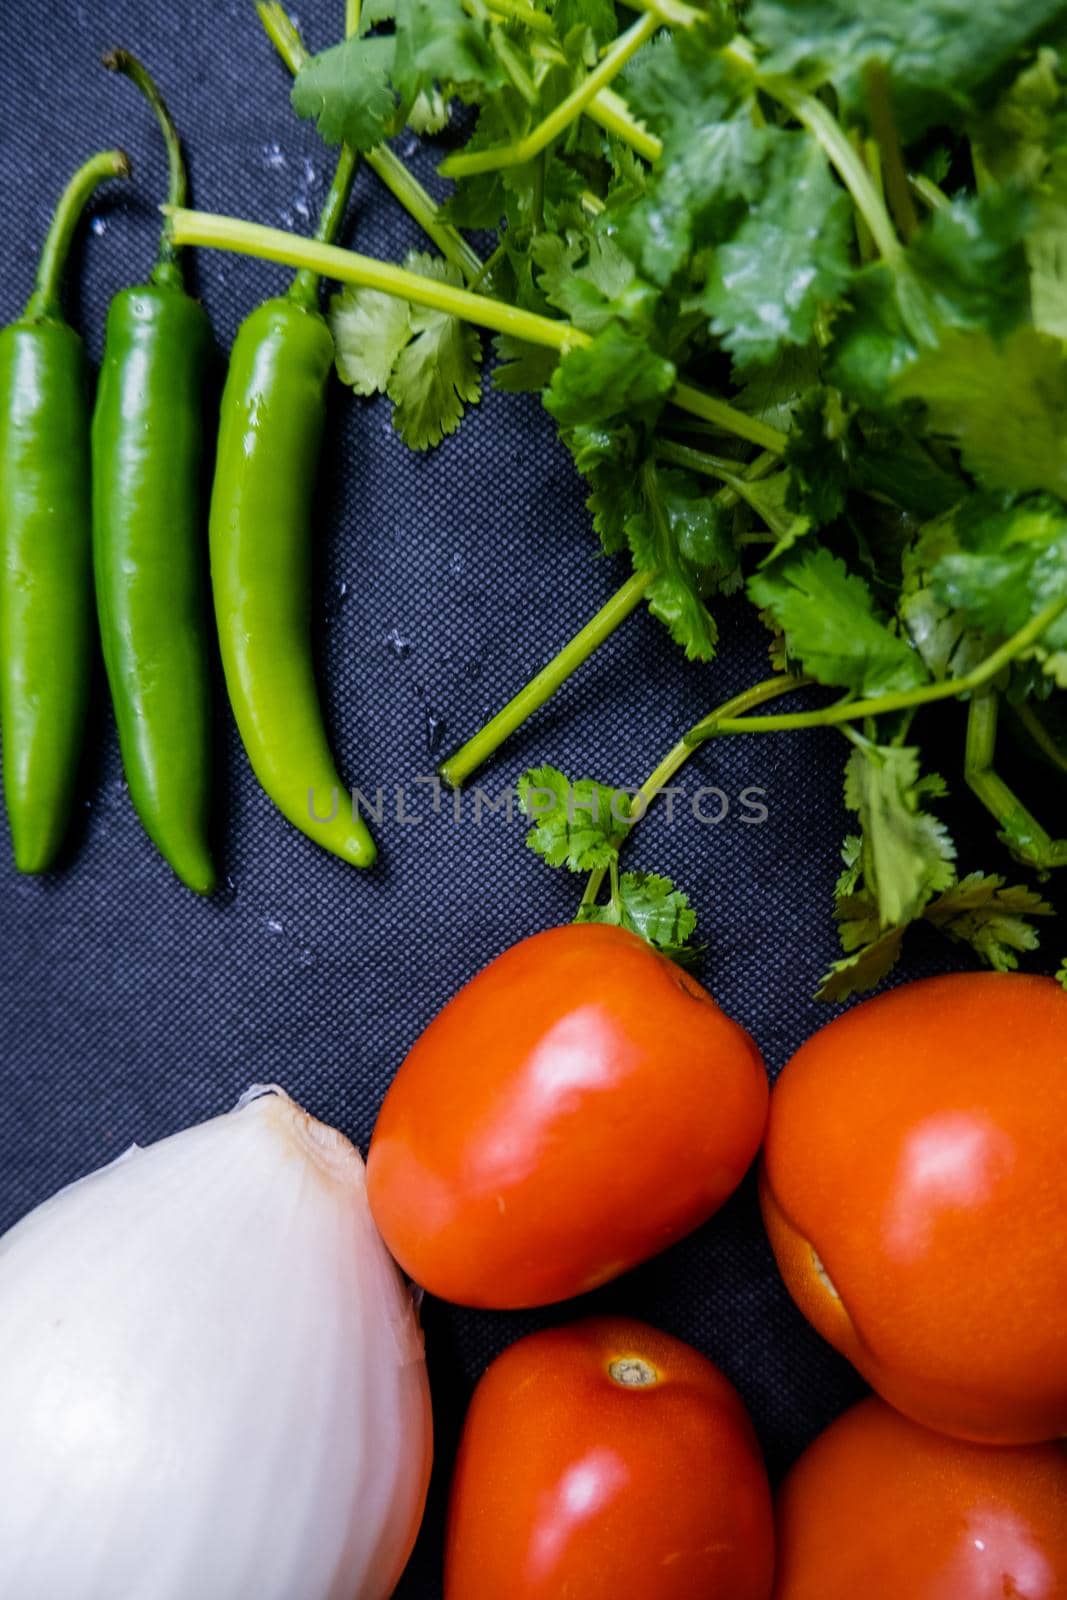 Chili peppers, onion, and a tomato above coriander by Kanelbulle